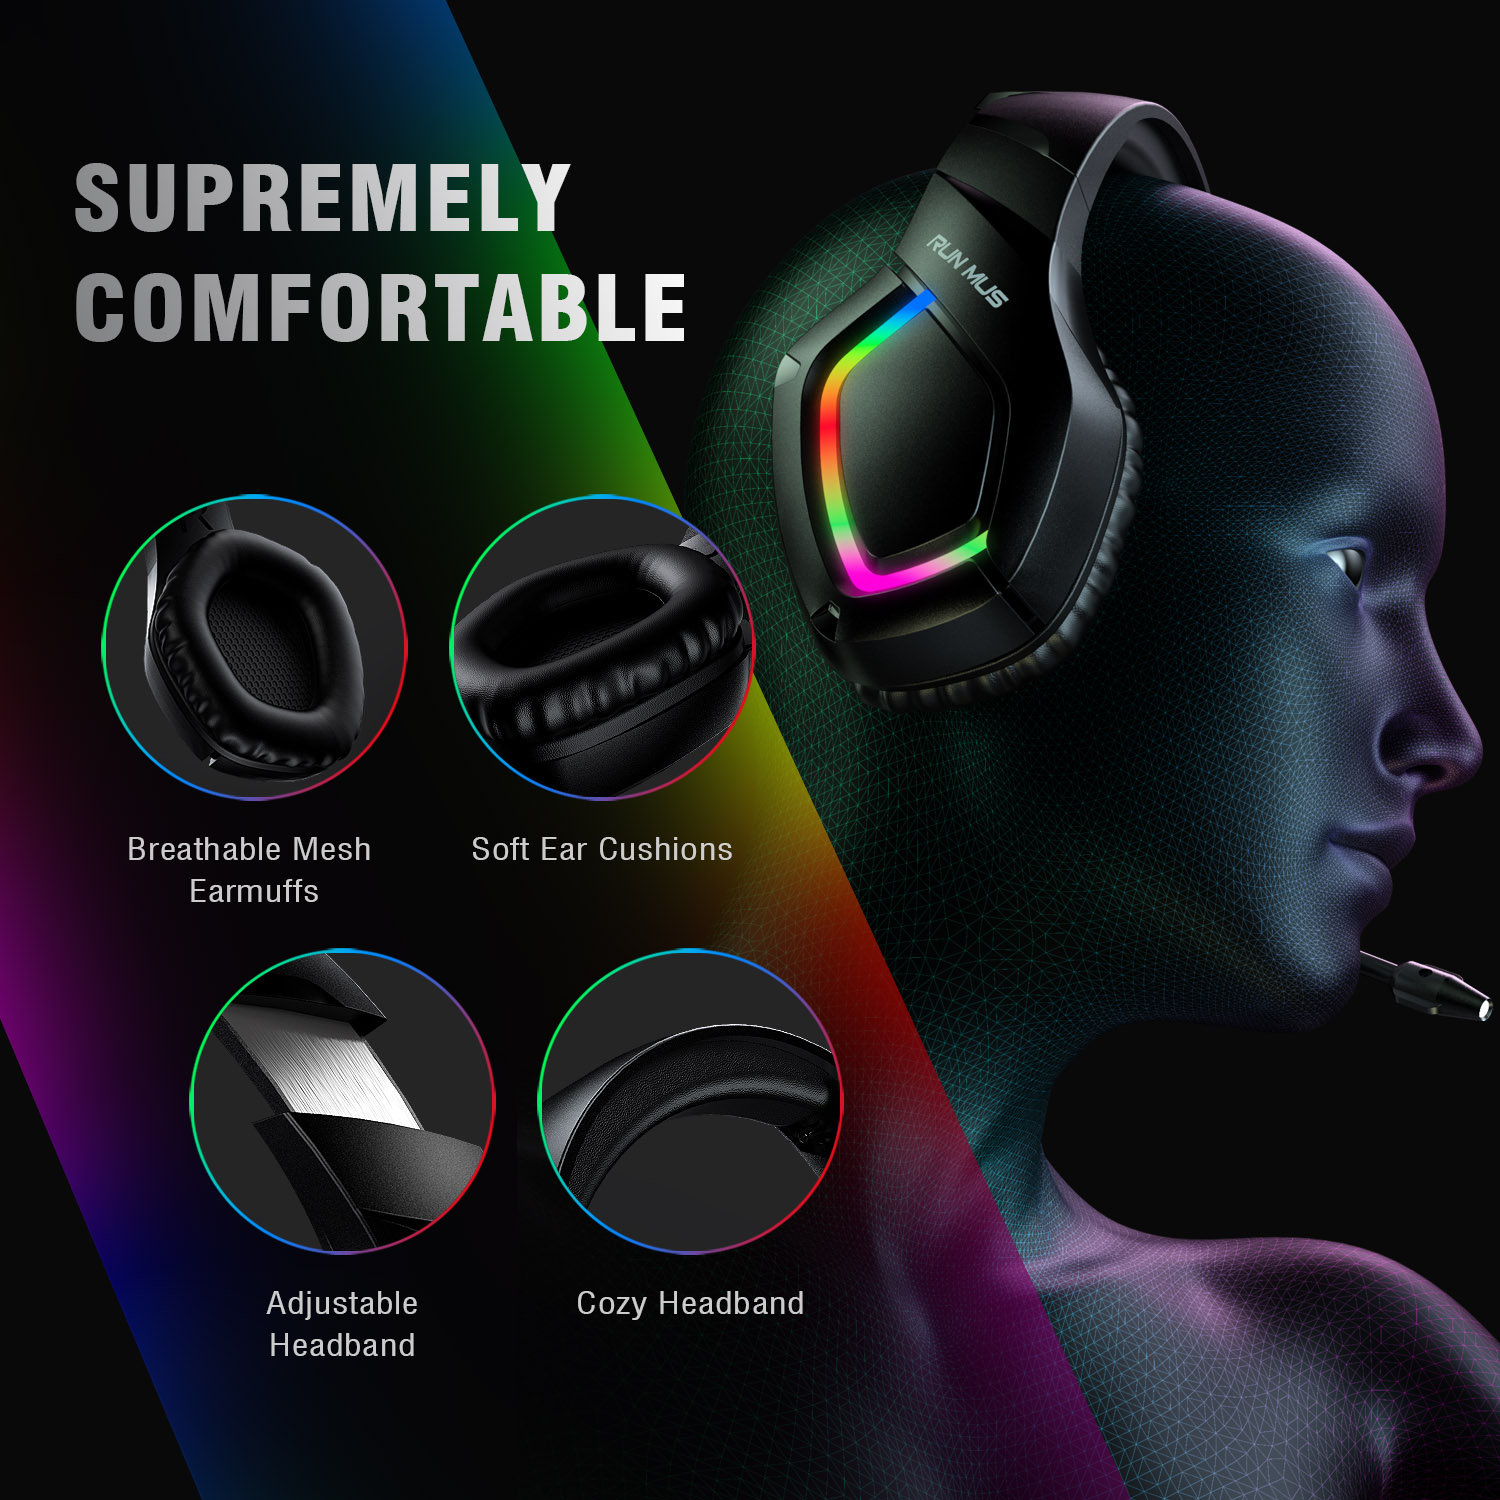 RUNMUS Gaming Headset PS4 Headset, Xbox Headset with 7.1 Surround Sound, Gaming Headphones Noise Cancelling Flexible Mic RGB Light Memory Earmuffs for PC, PS5, PS4, Xbox Series X/S, Switch - image 5 of 8